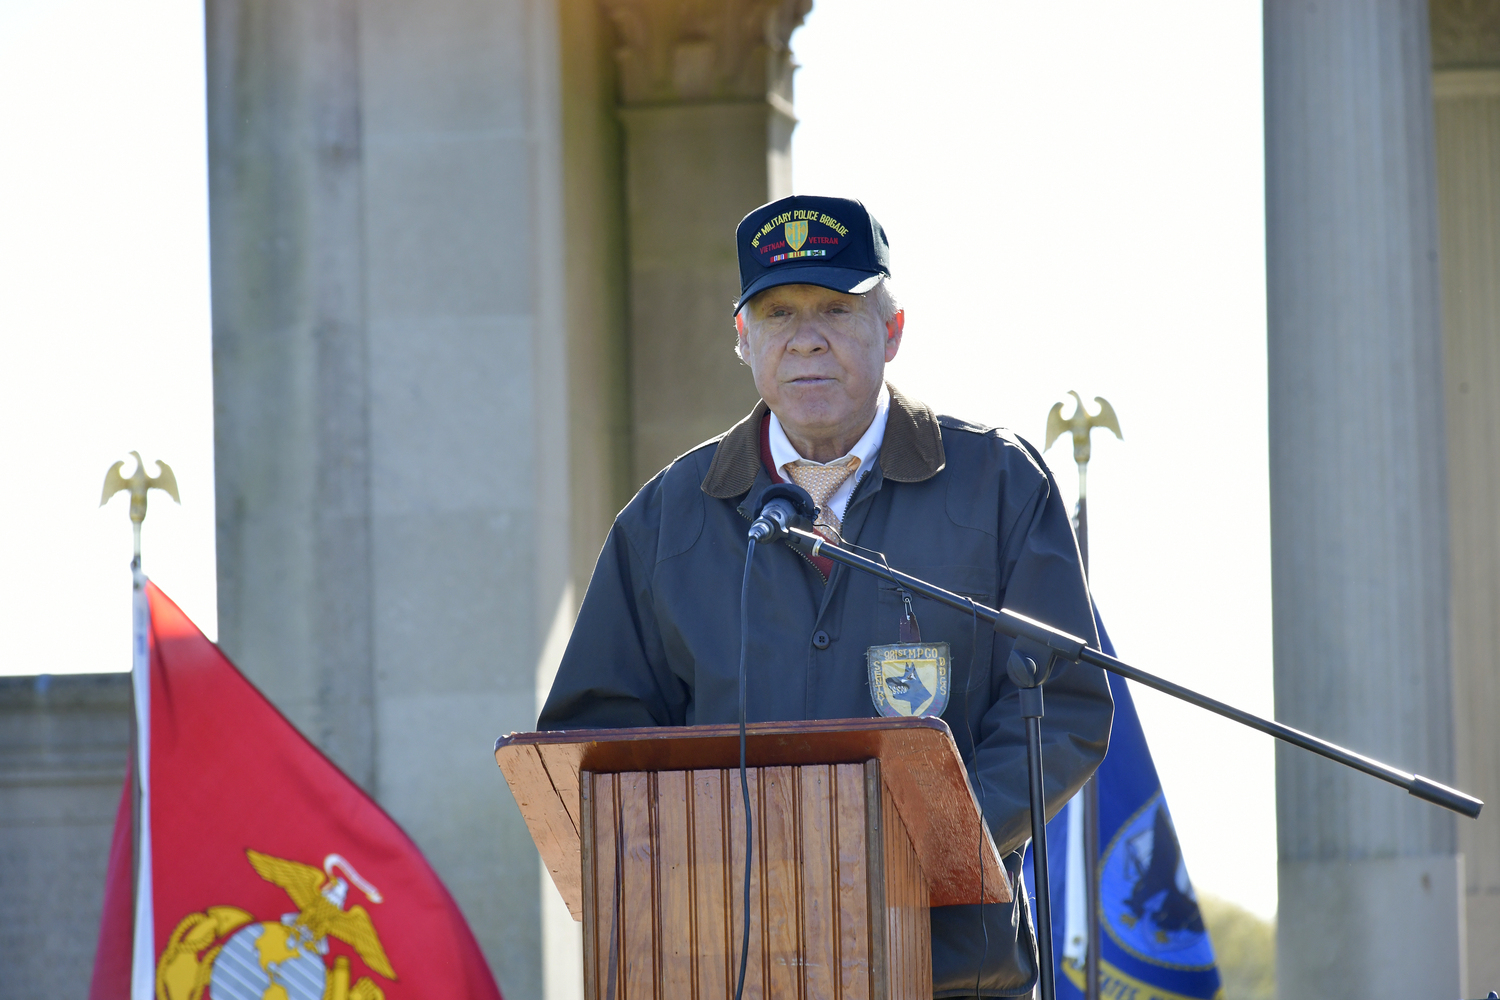 Tom Guldi gives the keynote speech at the Southampton Veterans Day observance on Saturday in Agawam Park.   DANA SHAW